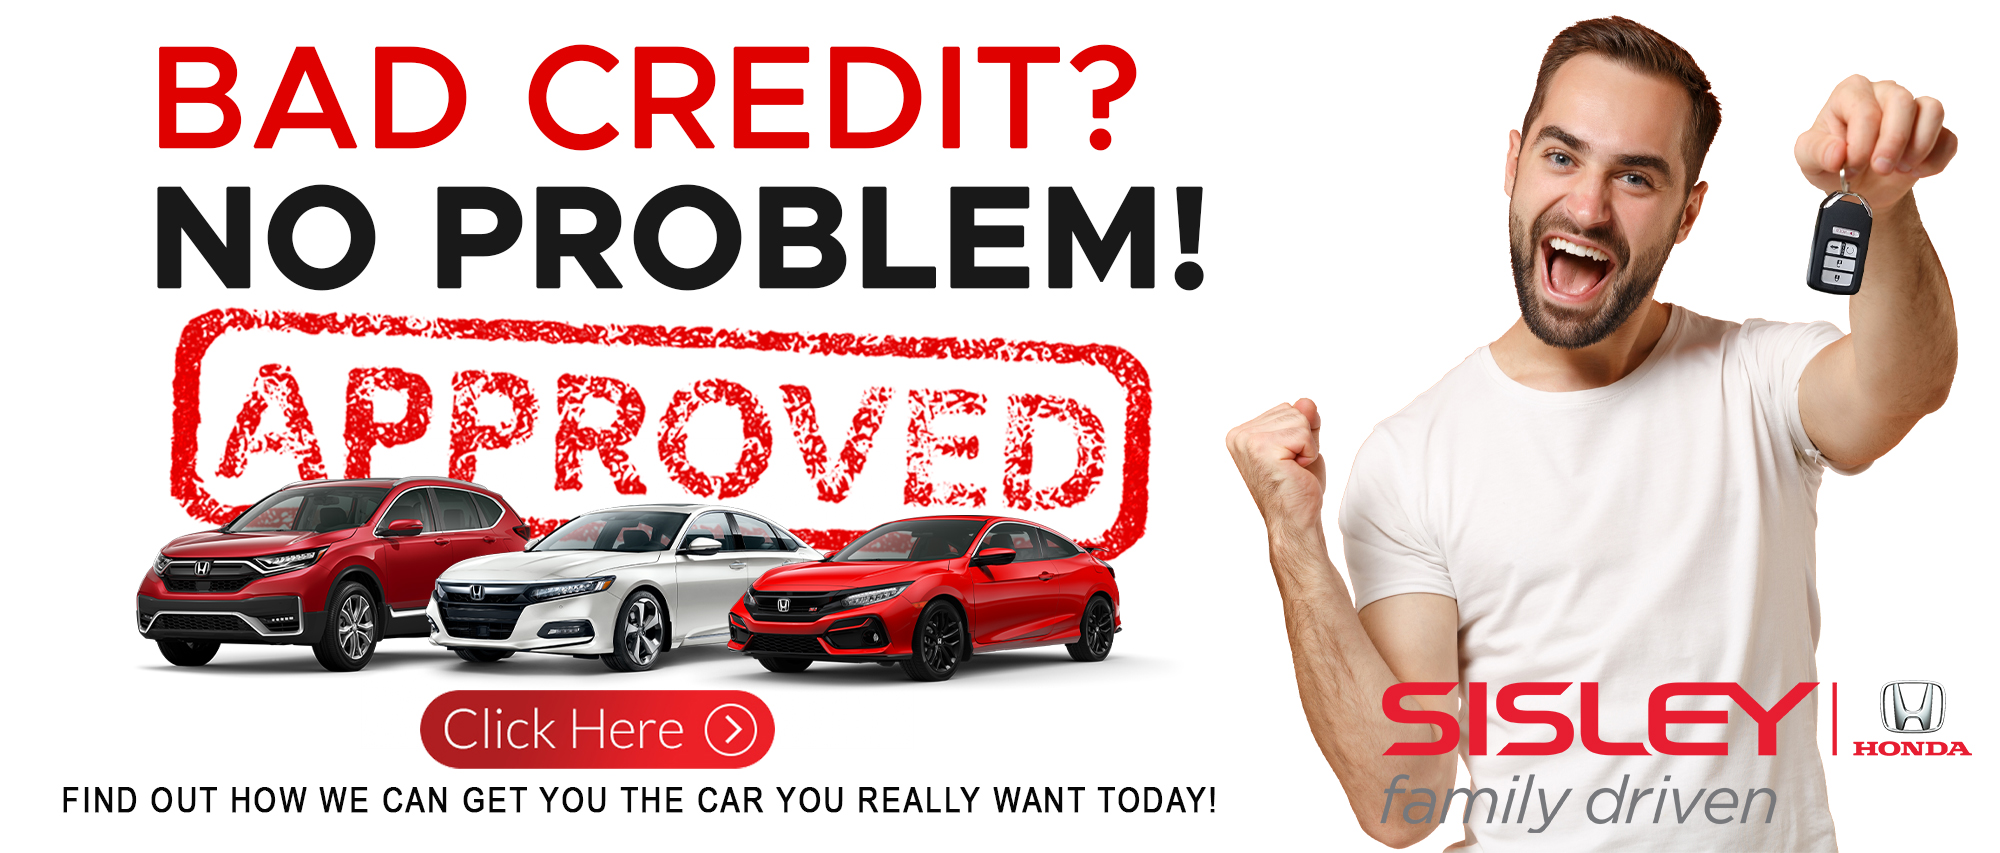 We can help you get the vehicle you really want, regardless of credit!